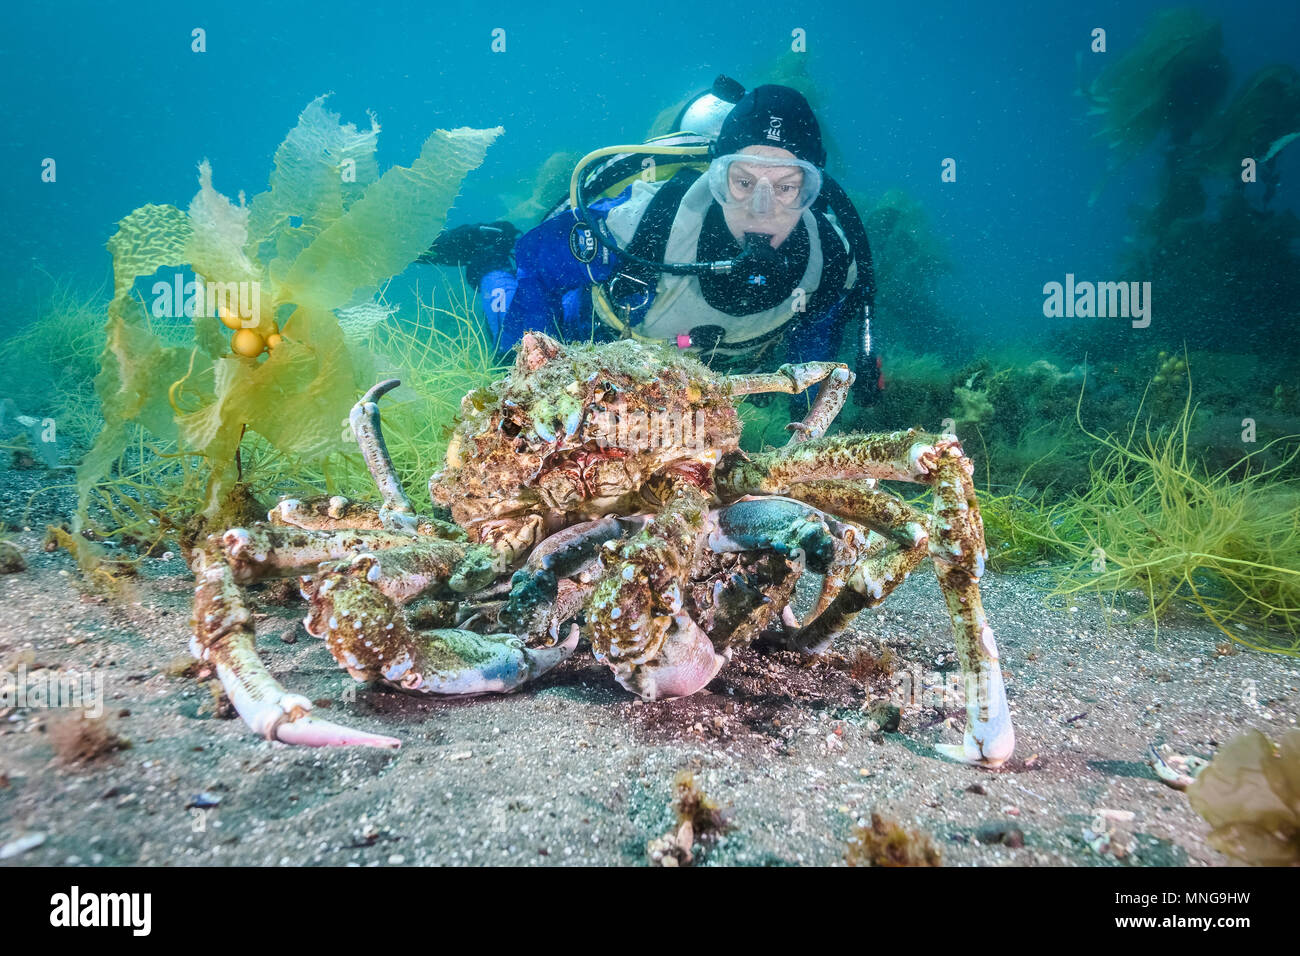 masking crab, Loxorhynchus crispatus, mating, and woman scuba diver, Anacapa Island, Channel Islands, Channel Islands National Park, California, USA,  Stock Photo